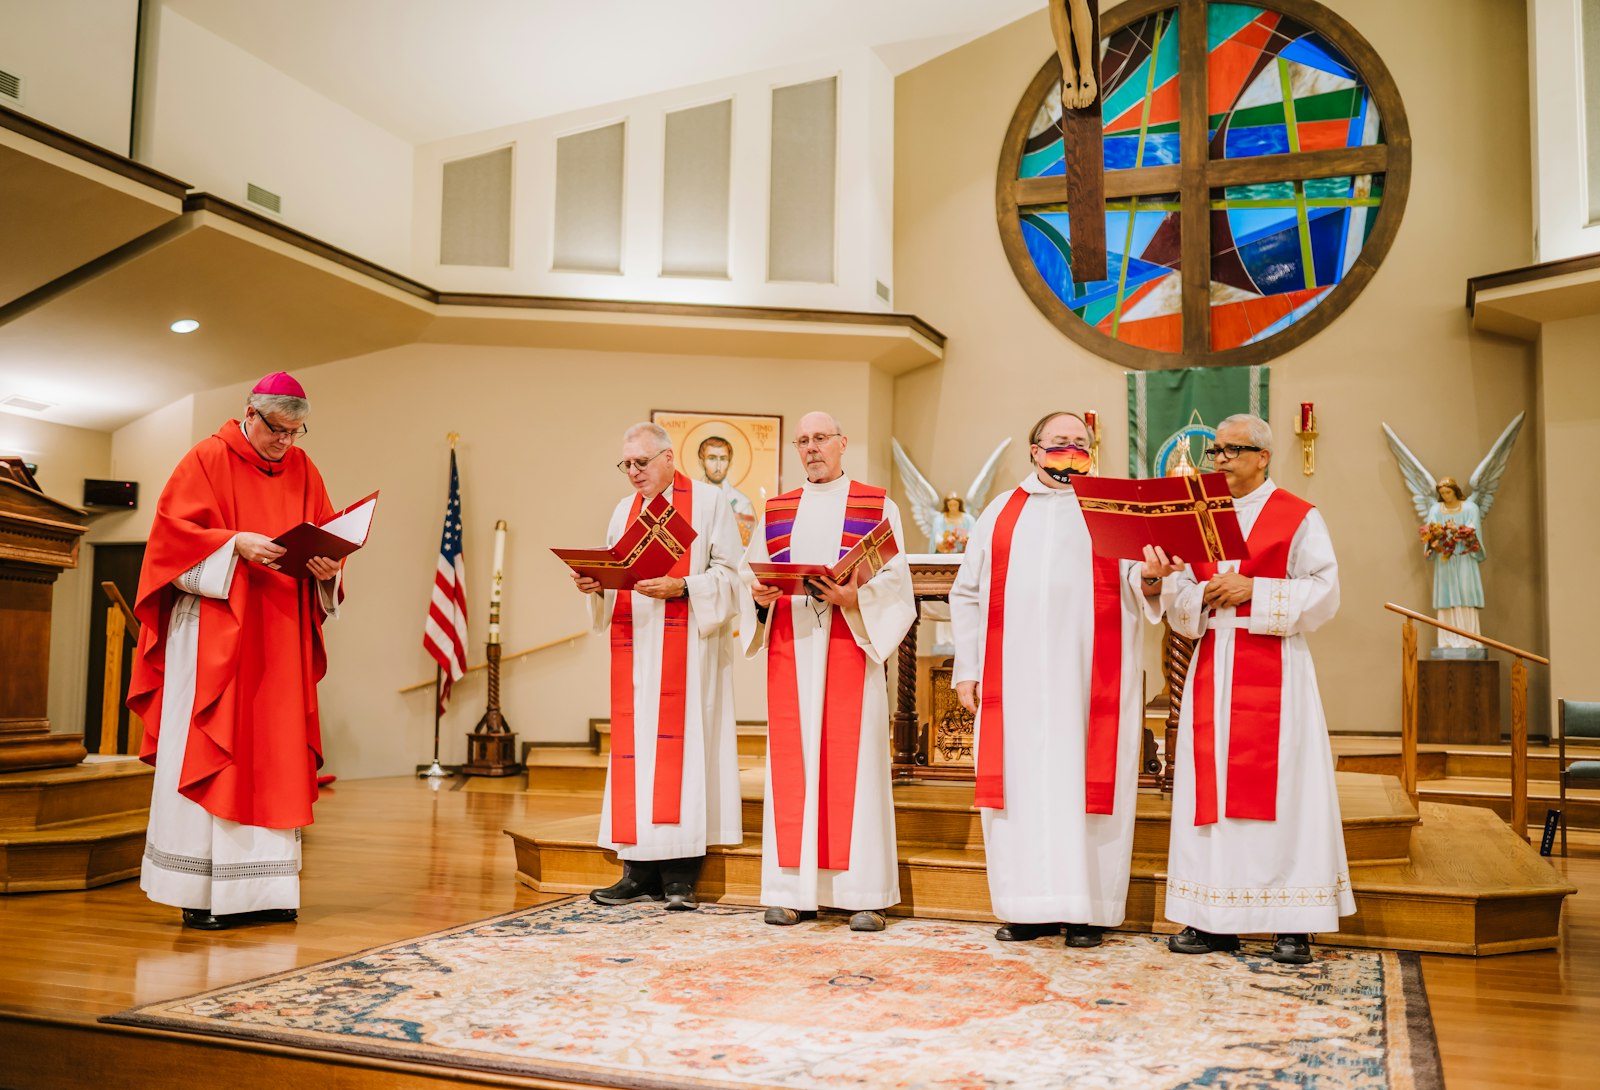 Auxiliary Bishop Gerard W. Battersby presides over a commissioning Mass with clergy from Downriver Family 3, a new family of parishes consisting of Sacred Heart in Grosse Ile, St. Cyprian in Riverview, St. Joseph in Trenton, Our Lady of the Woods in Woodhaven, St. Roch in Gibraltar, and St. Timothy in Trenton, on Sept. 14 at St. Timothy. (Valaurian Waller | Detroit Catholic)